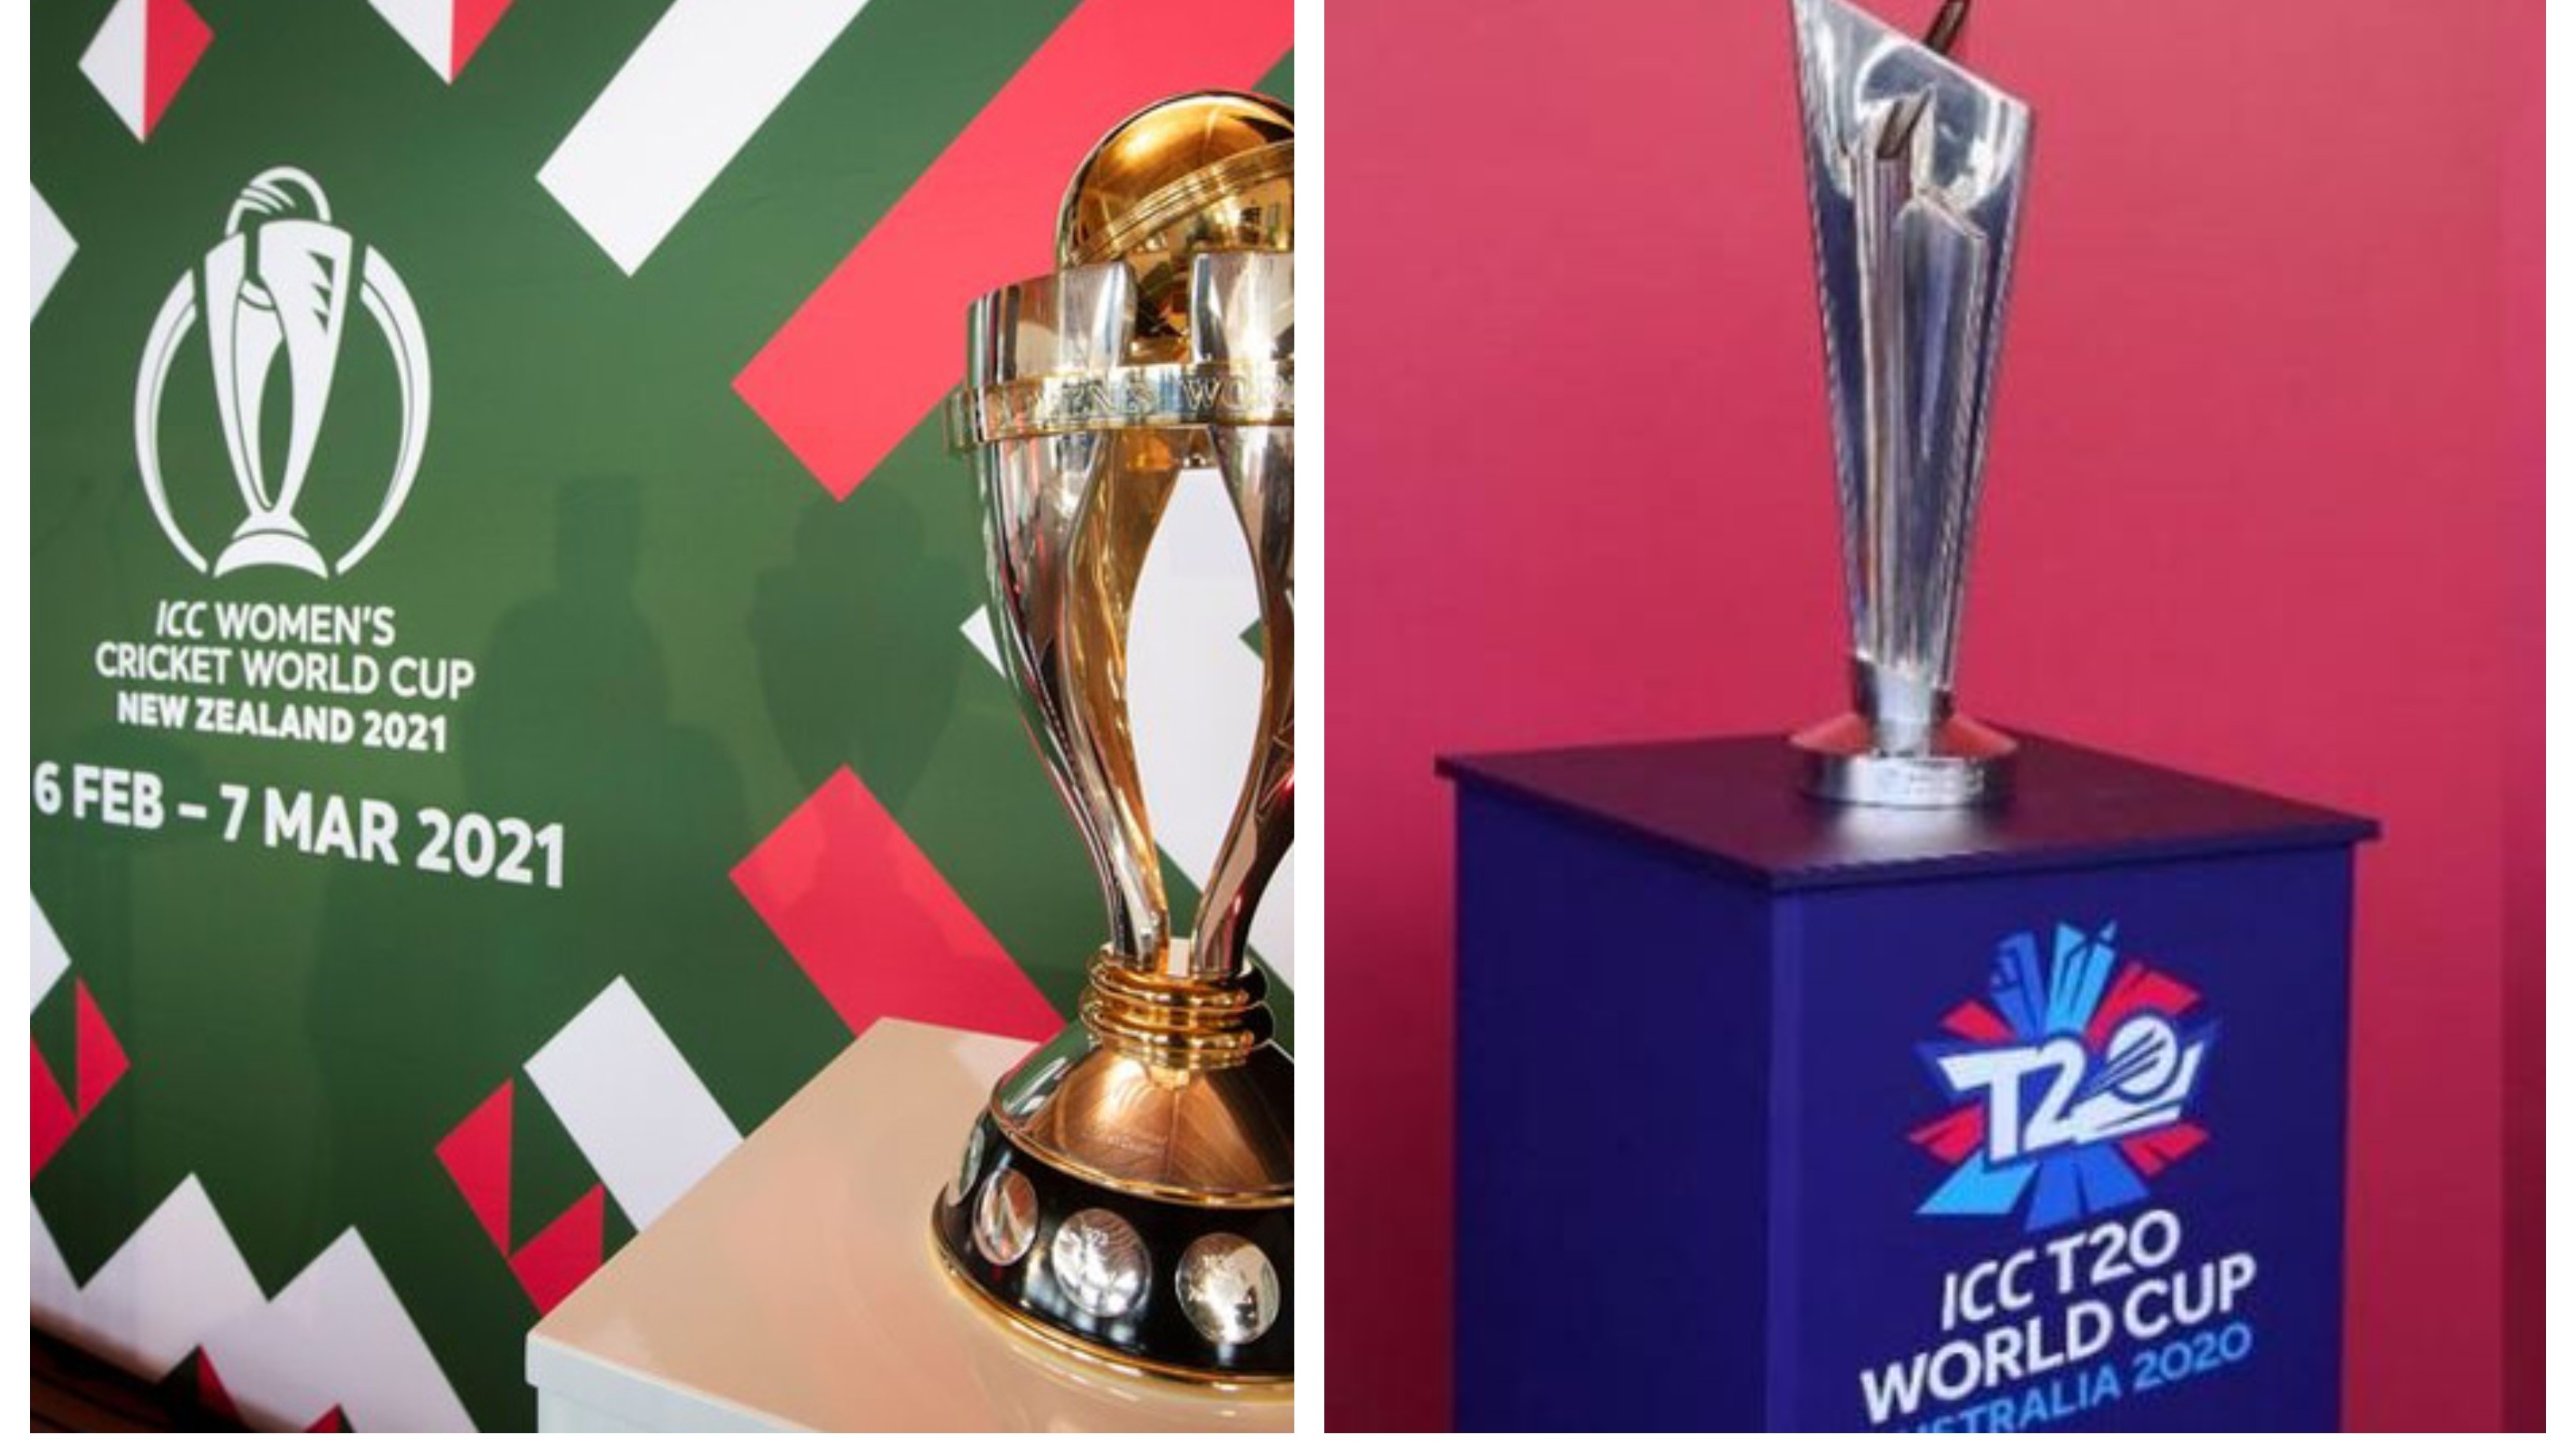 2021 Women's WC likely to be delayed as ICC contemplates February-March window for Men's T20 WC: Report